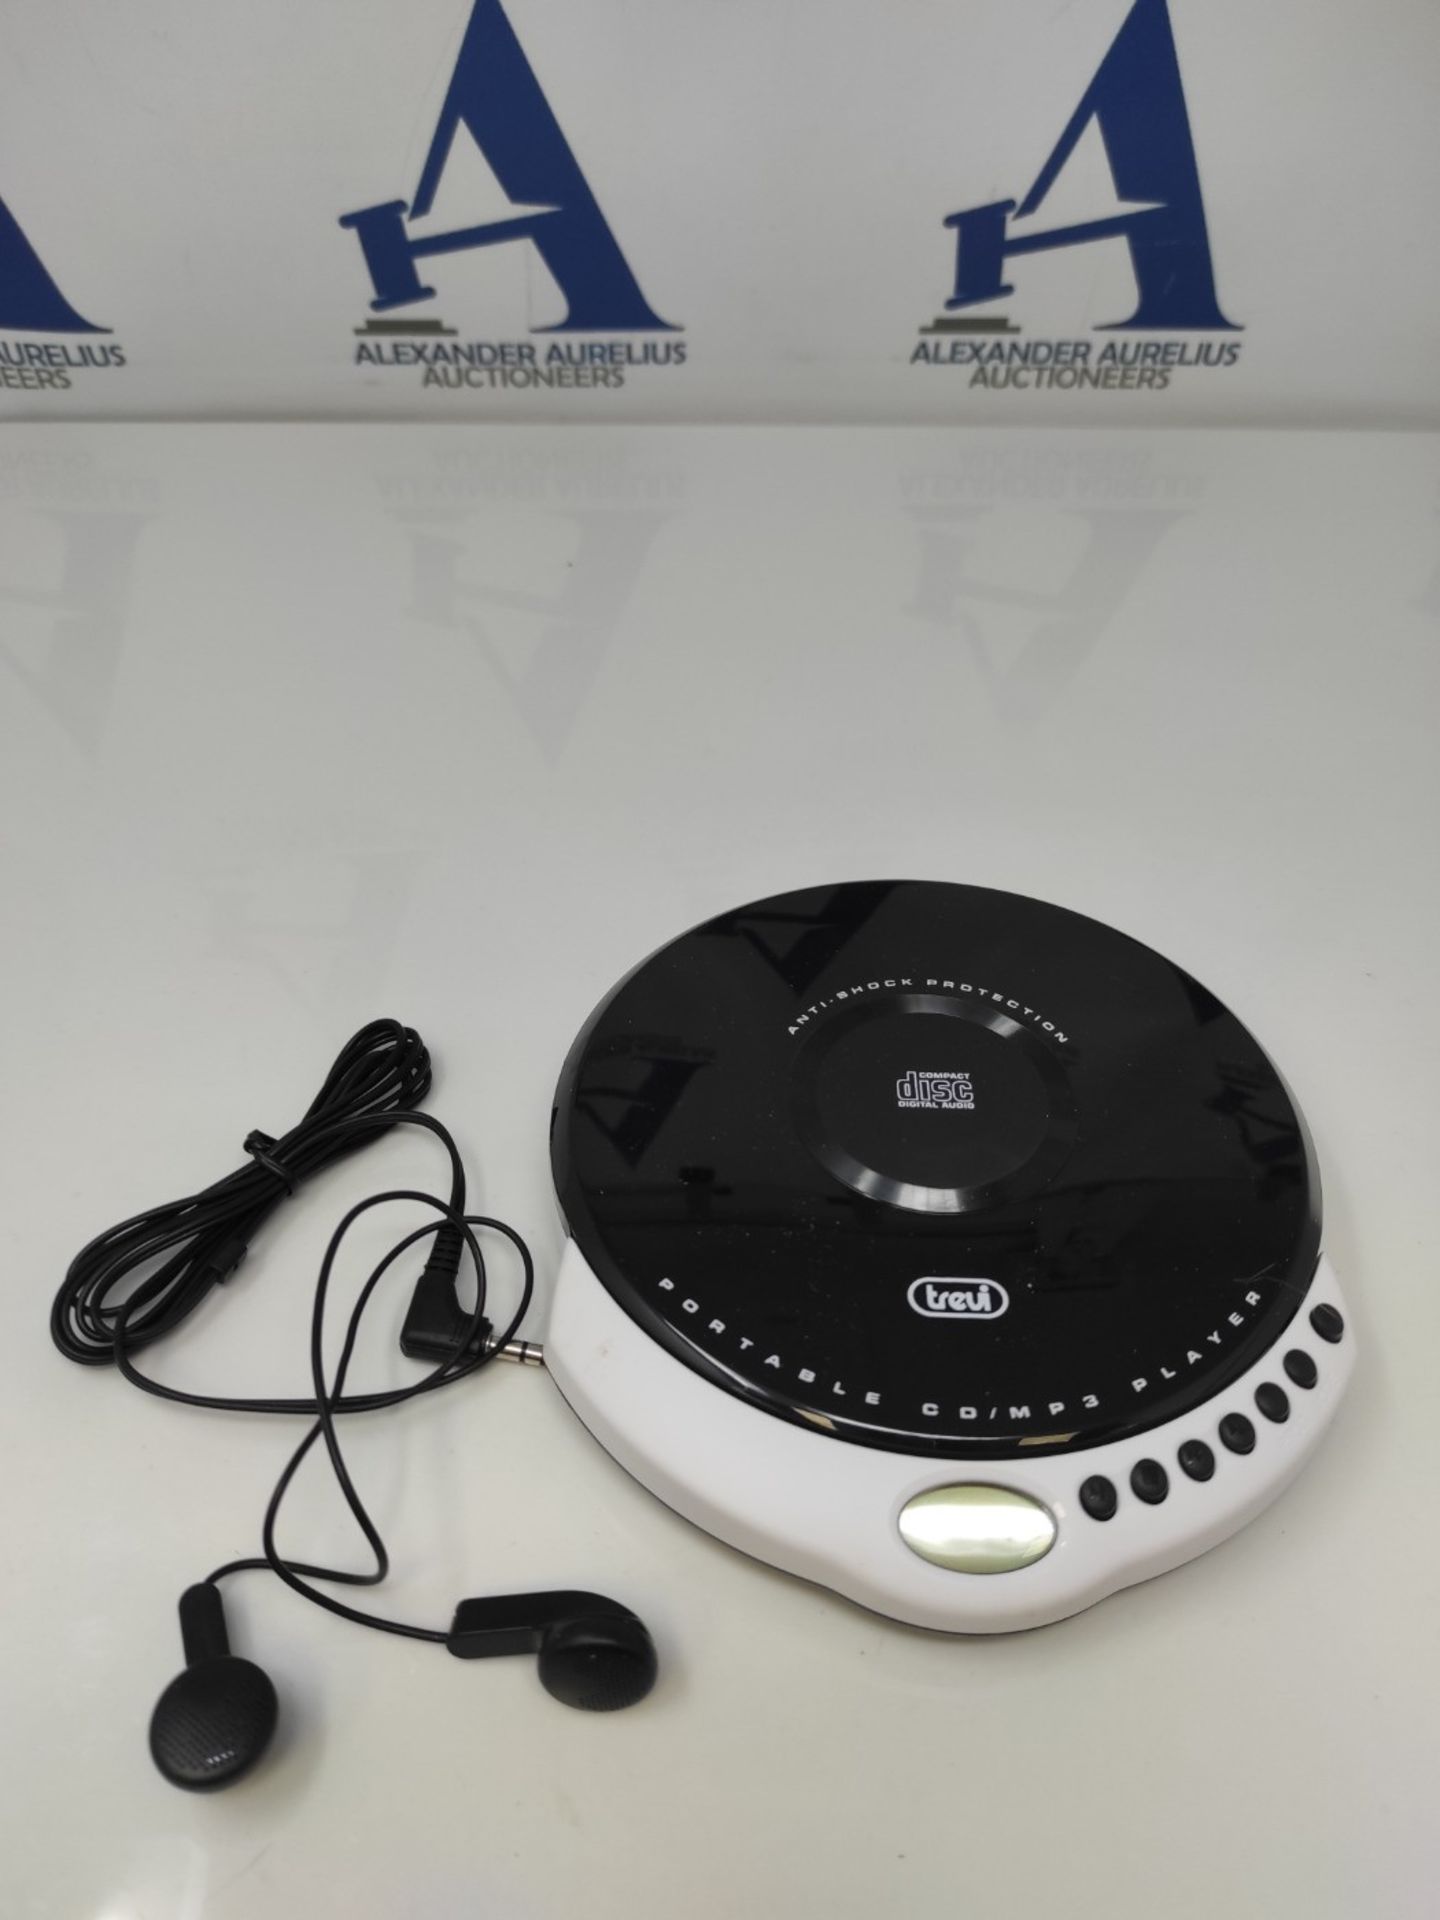 Trevi - Portable CD Player - Image 6 of 6